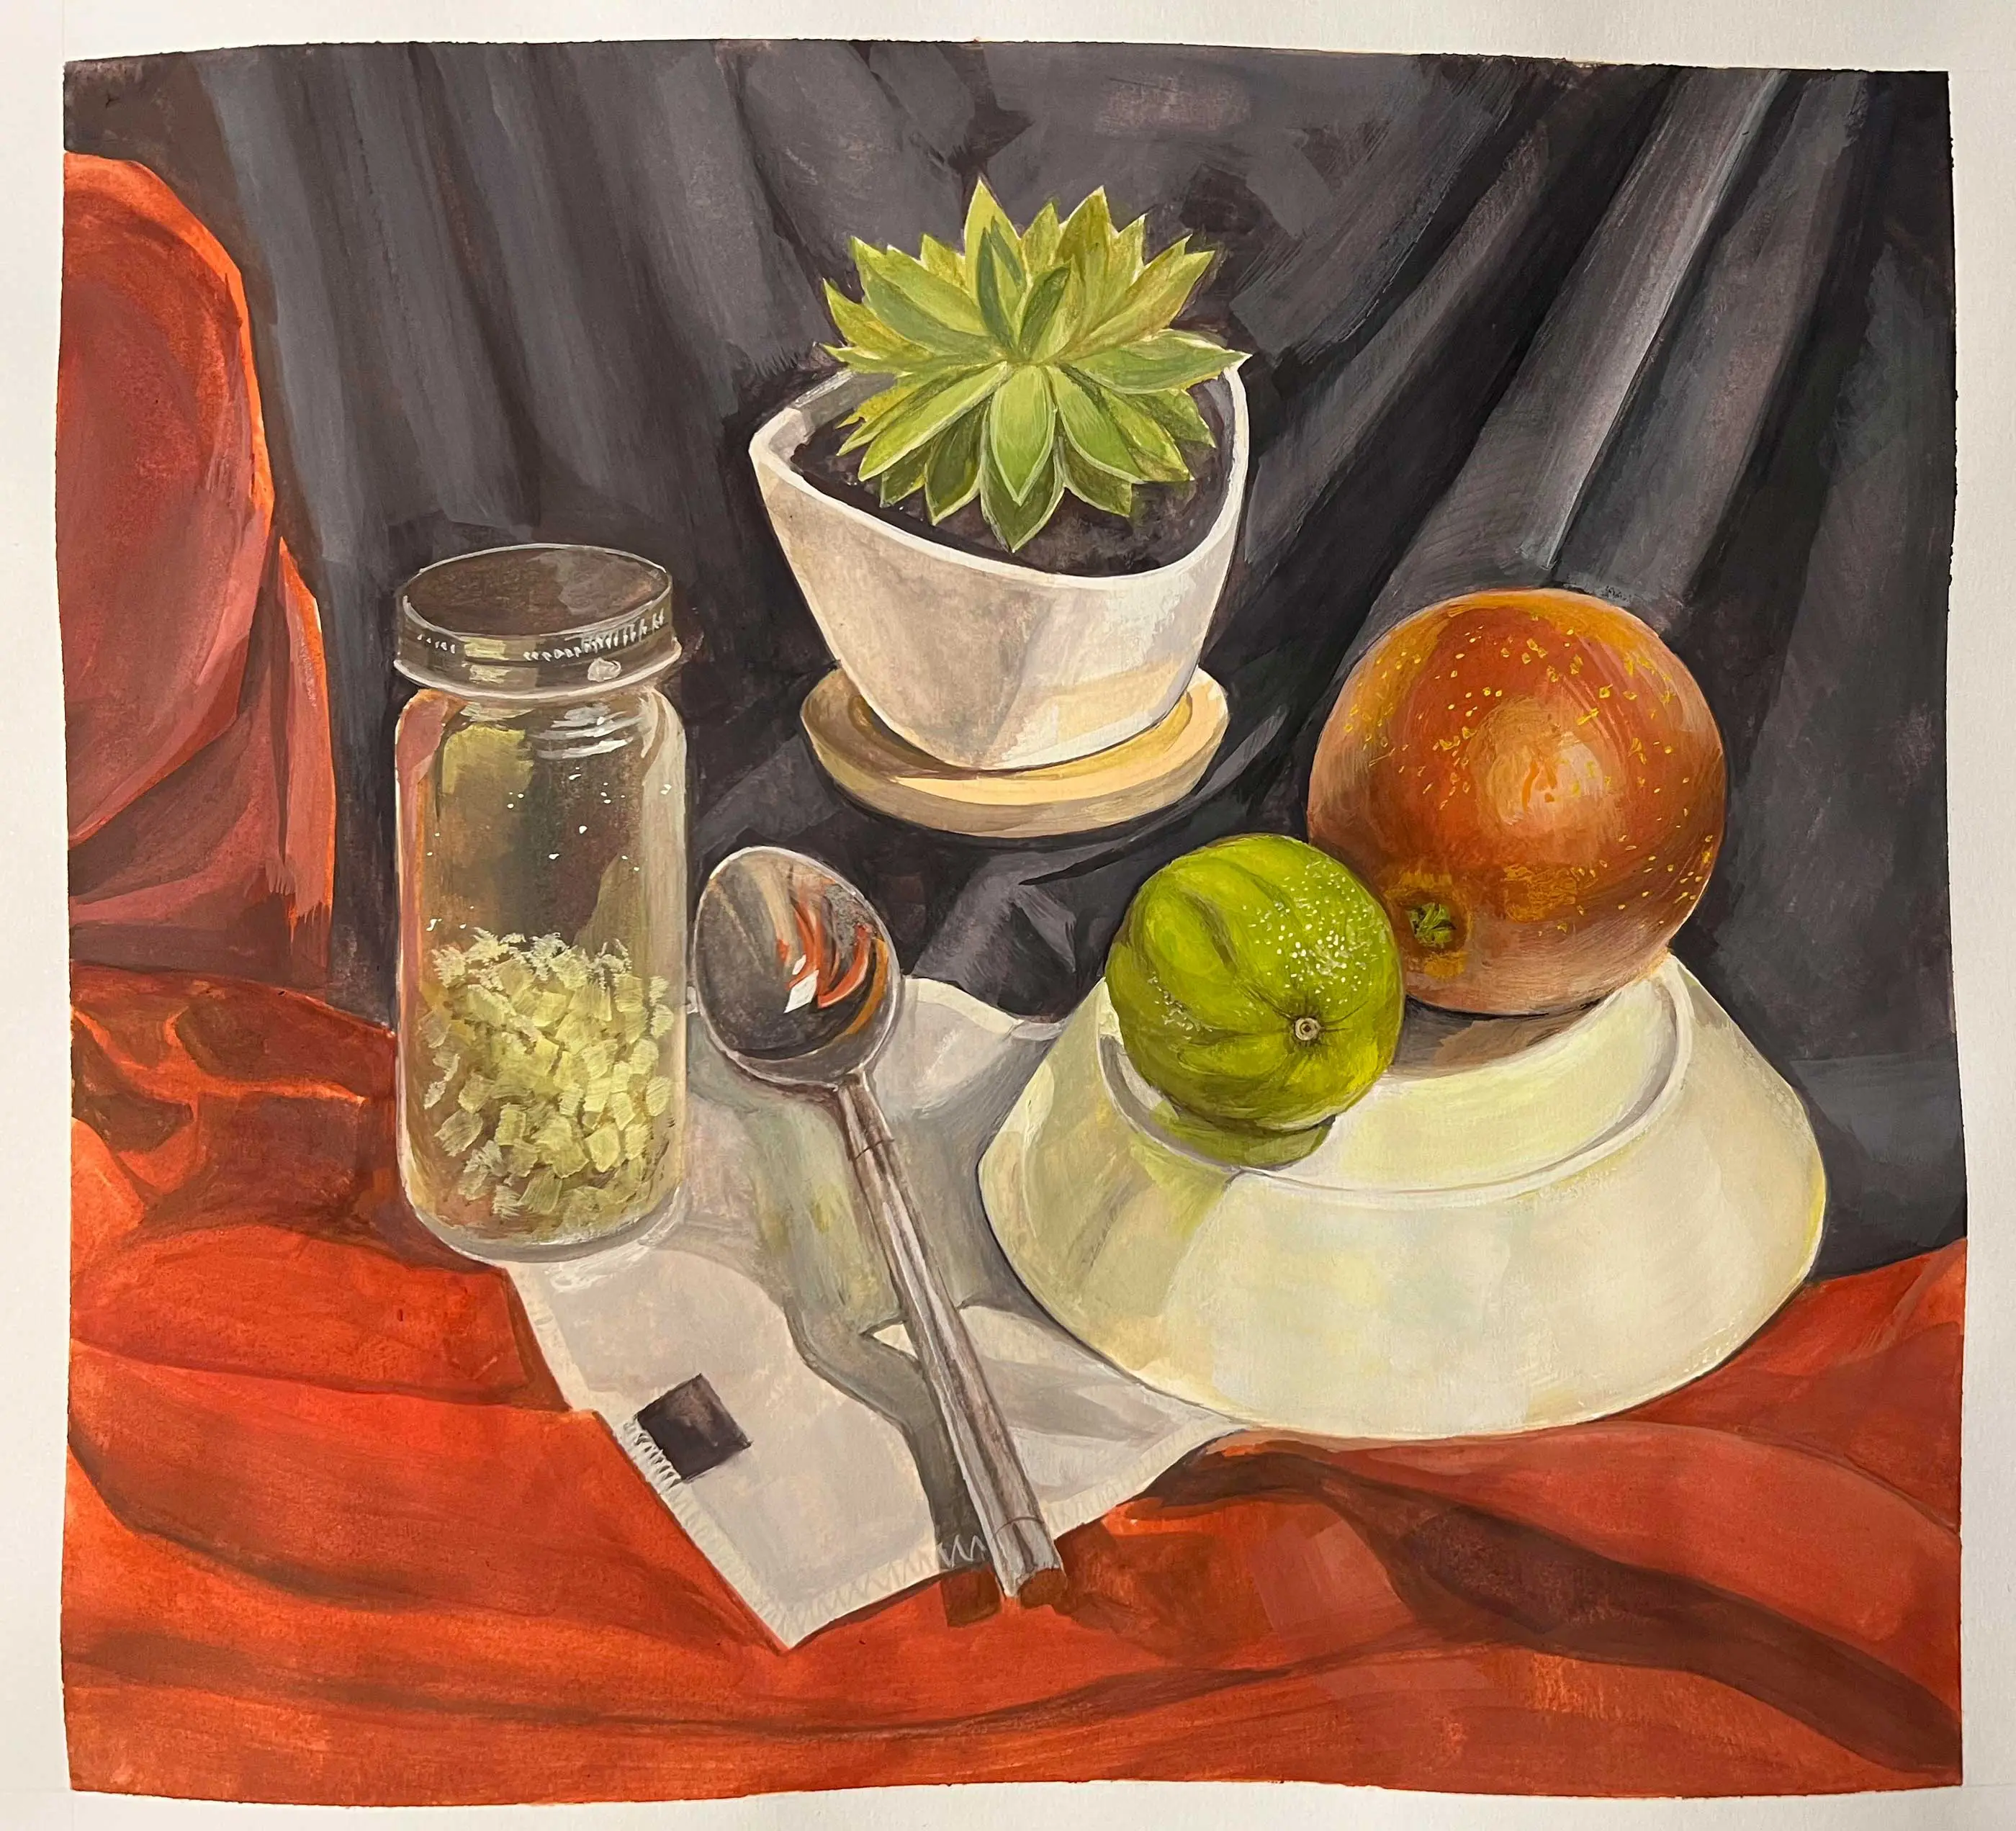 A painting of fruit and kitchen dishes resting on wrinkled cloth.